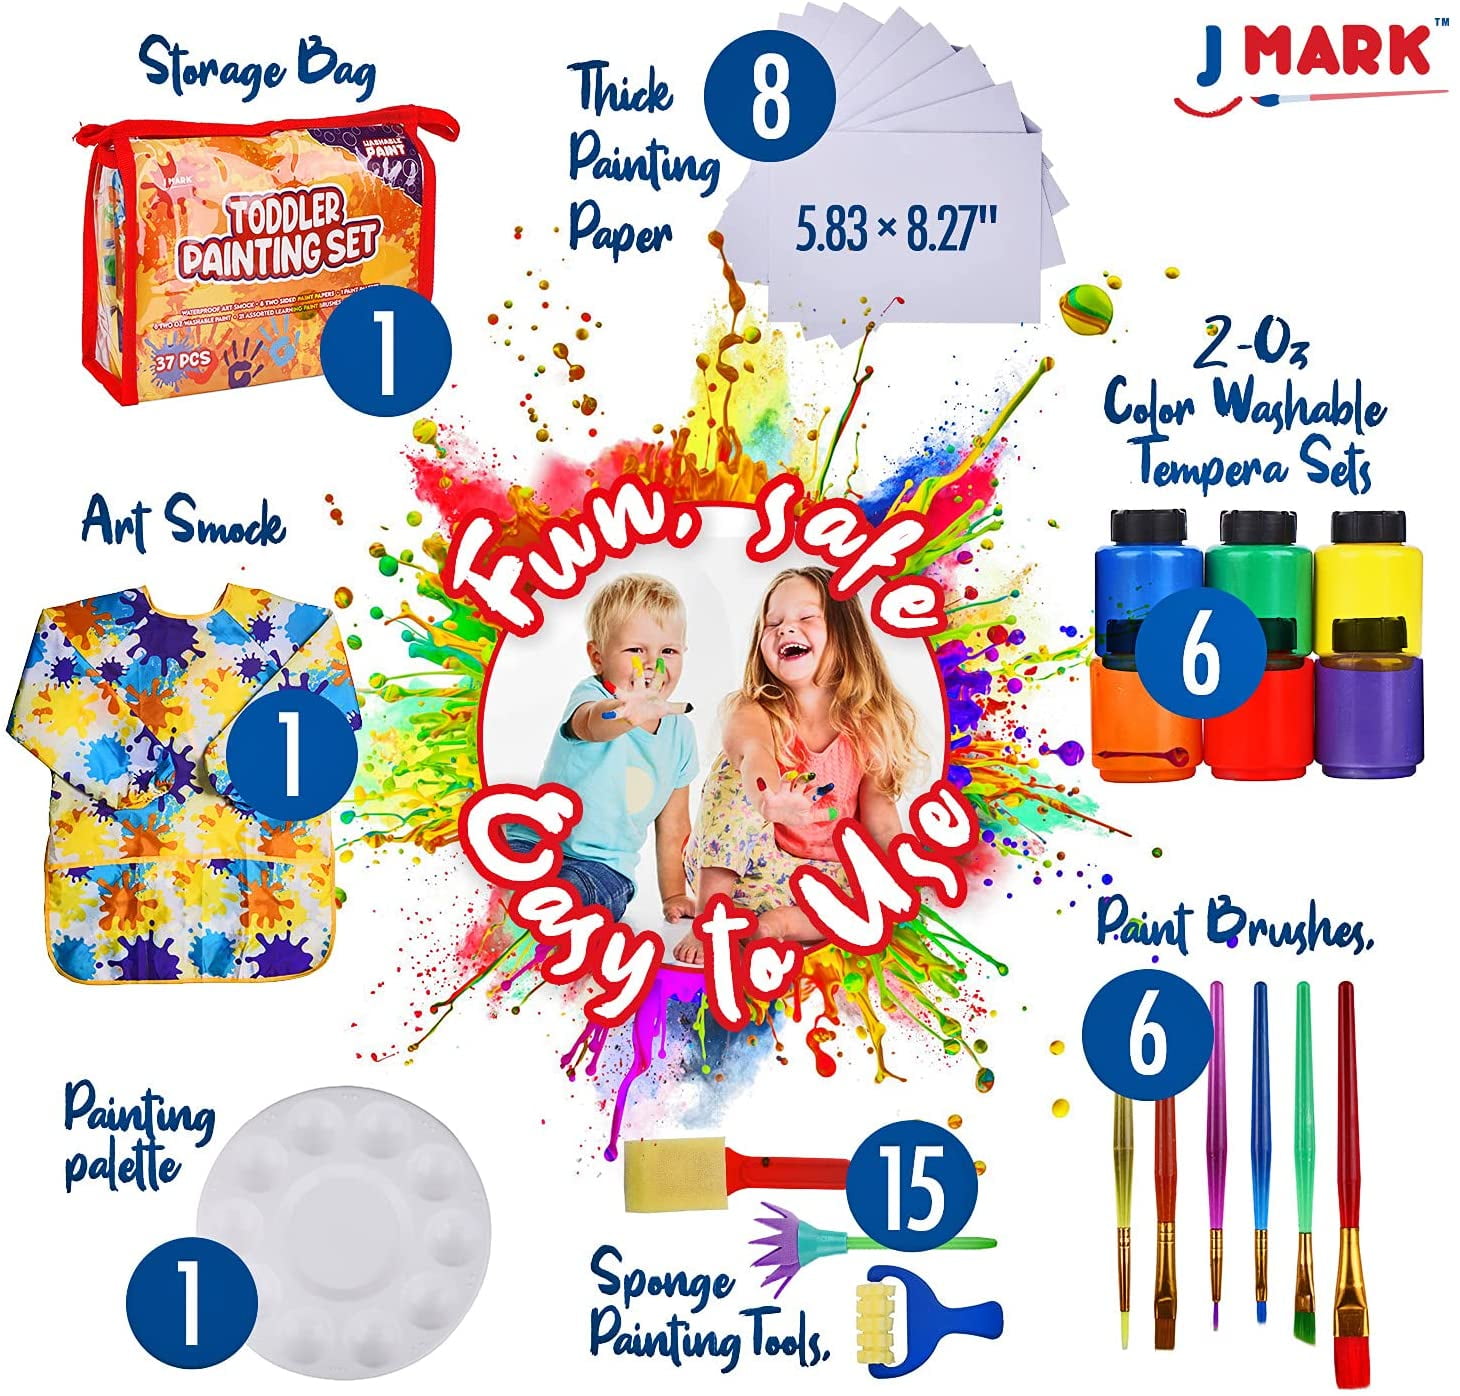 J MARK Kids Paint Set and Paint Easel – 14-PIECE ACRYLIC PAINTING KIT -  Multi - 77 requests